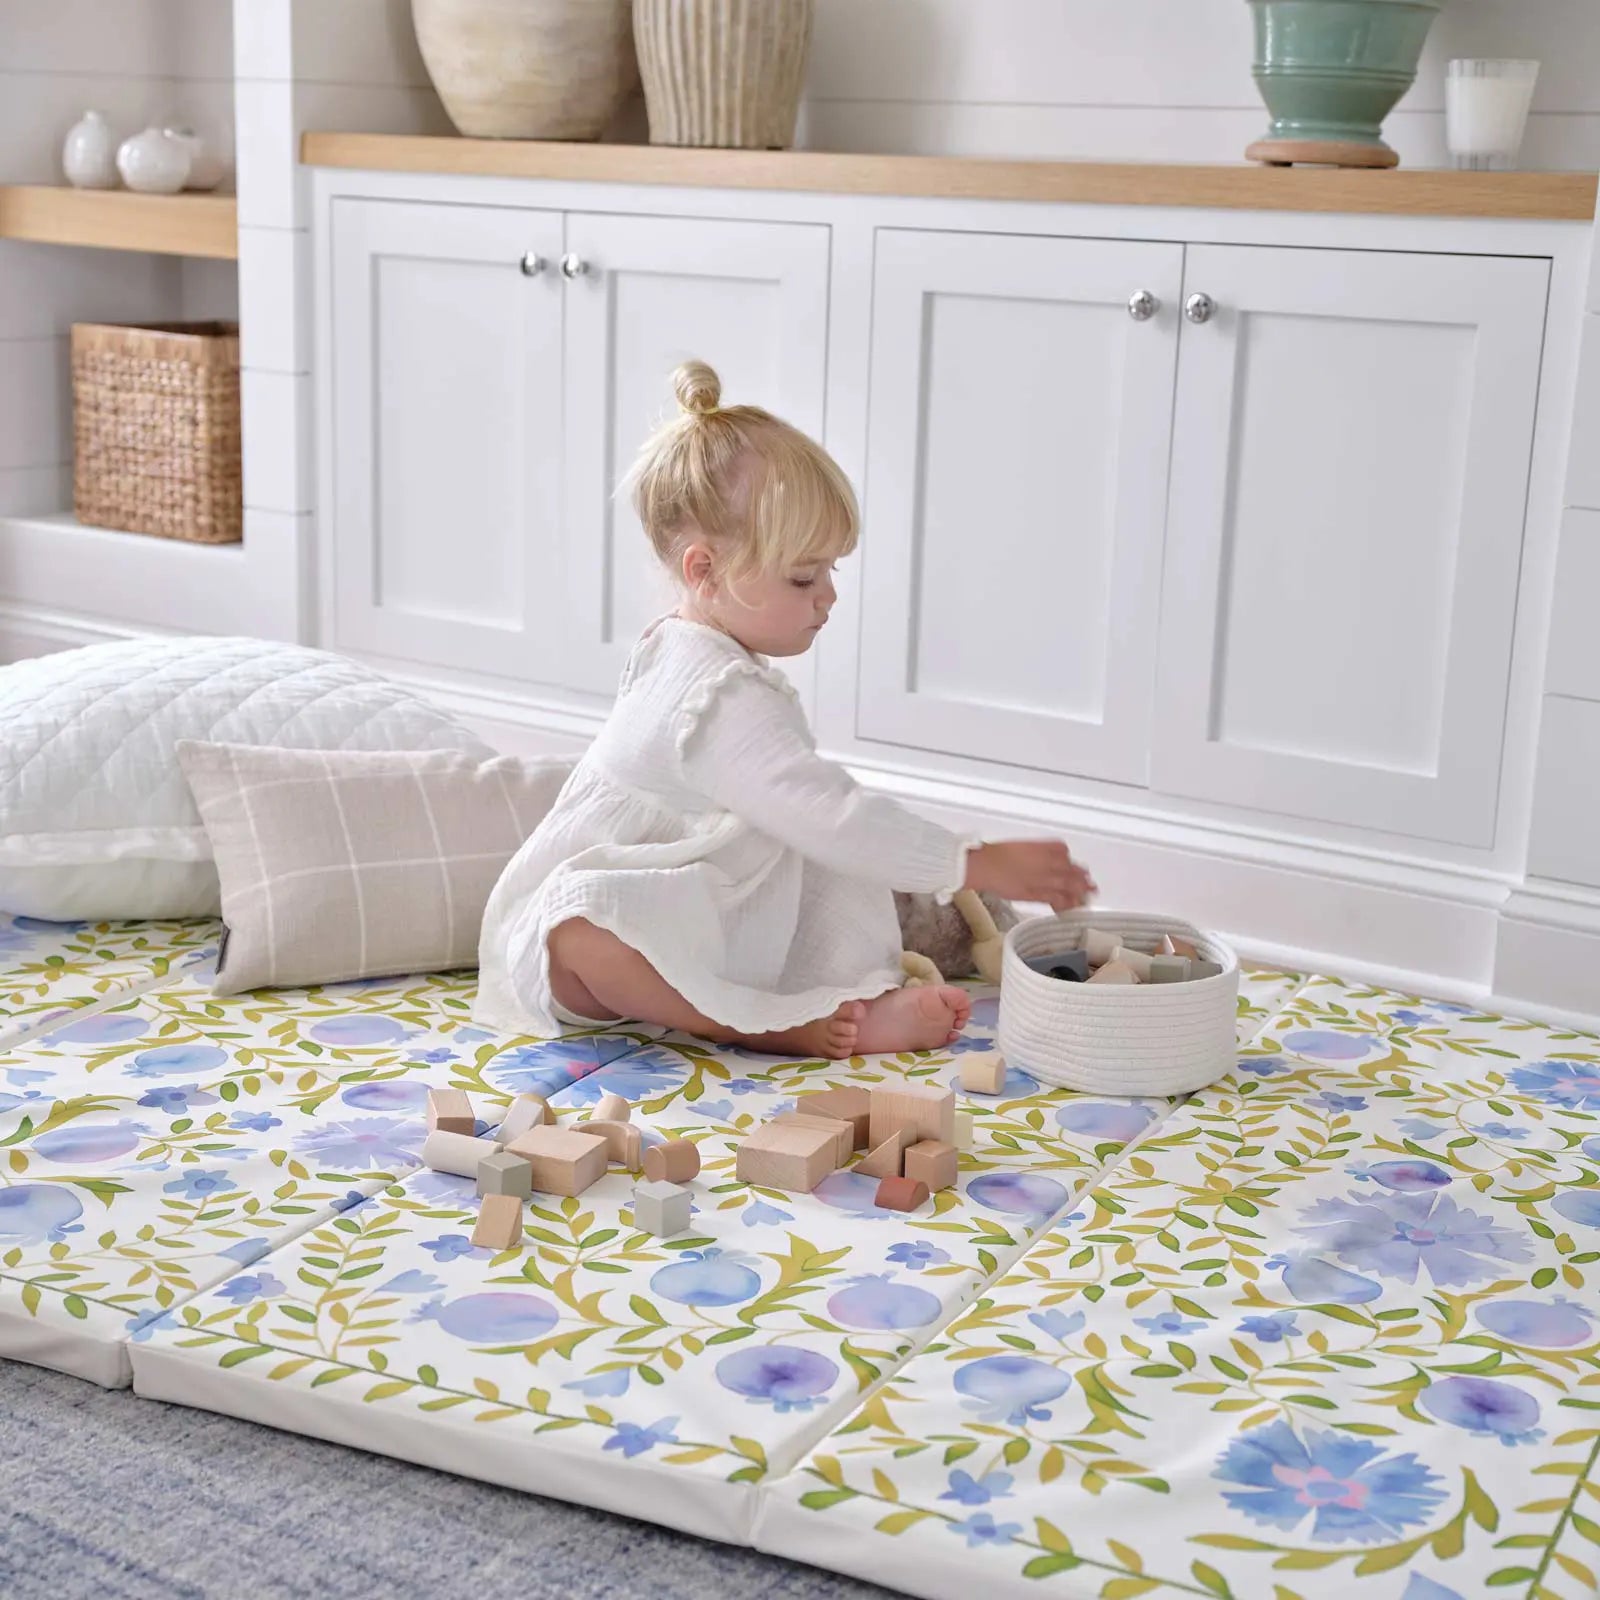 Bluebell blue green and white floral tumbling mat shown in a living room with toddler girl sitting on the mat with pillows behind her playing with wooden blocks